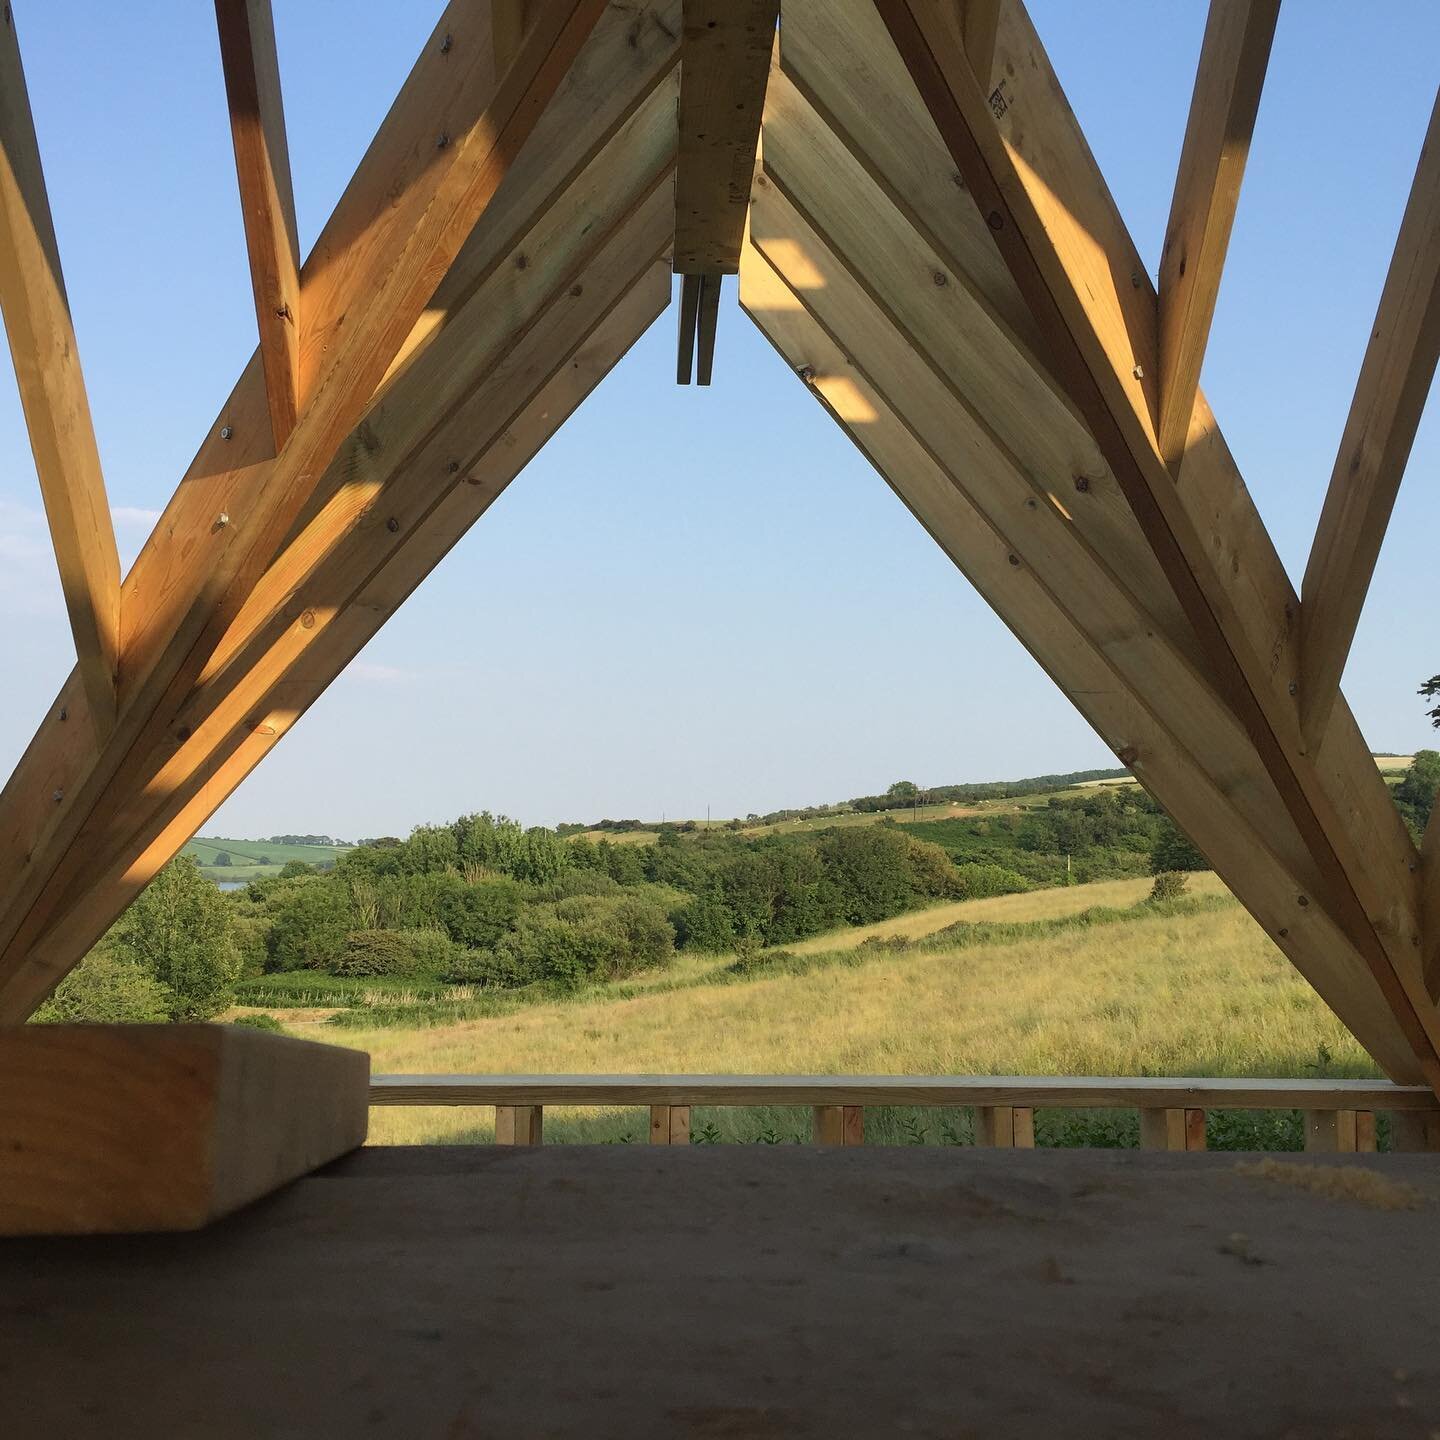 'Poppit house' is coming together very well, with beautiful views framed in all directions

#poppitsands
#westwalesarchitect
#pembrokeshirearchitect
#pembrokeshire
#welshschoolofarchitecture #nofilter